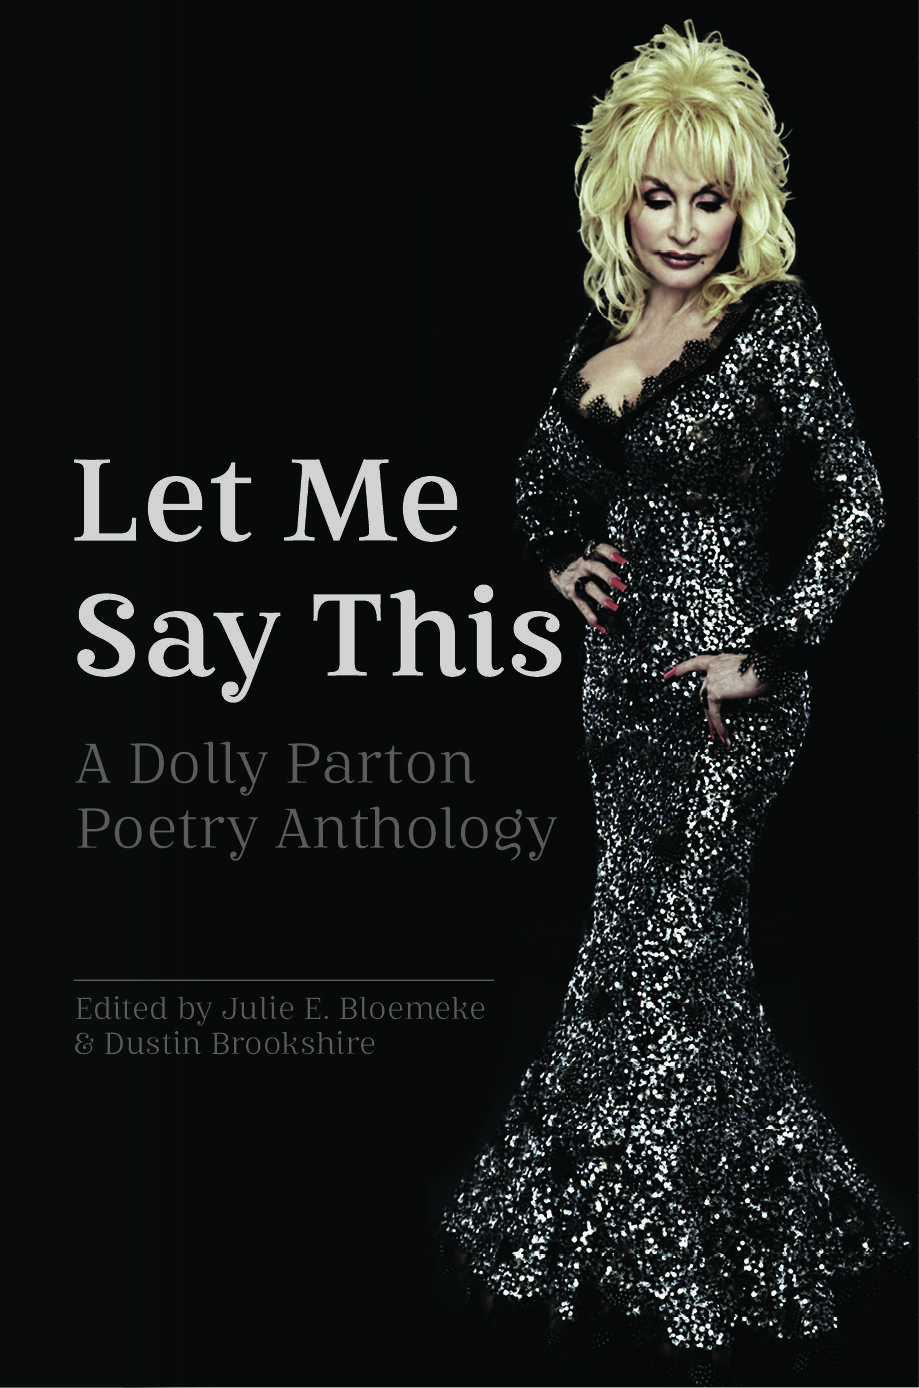 Let Me Say This: A Dolly Parton Poetry Anthology edited by Julie E. Bloemeke &amp; Dustin Brookshire. Dolly Parton stands in silhouette on a black background. She's wearing a long sleeved black sequined gown with a plunging decoletage.